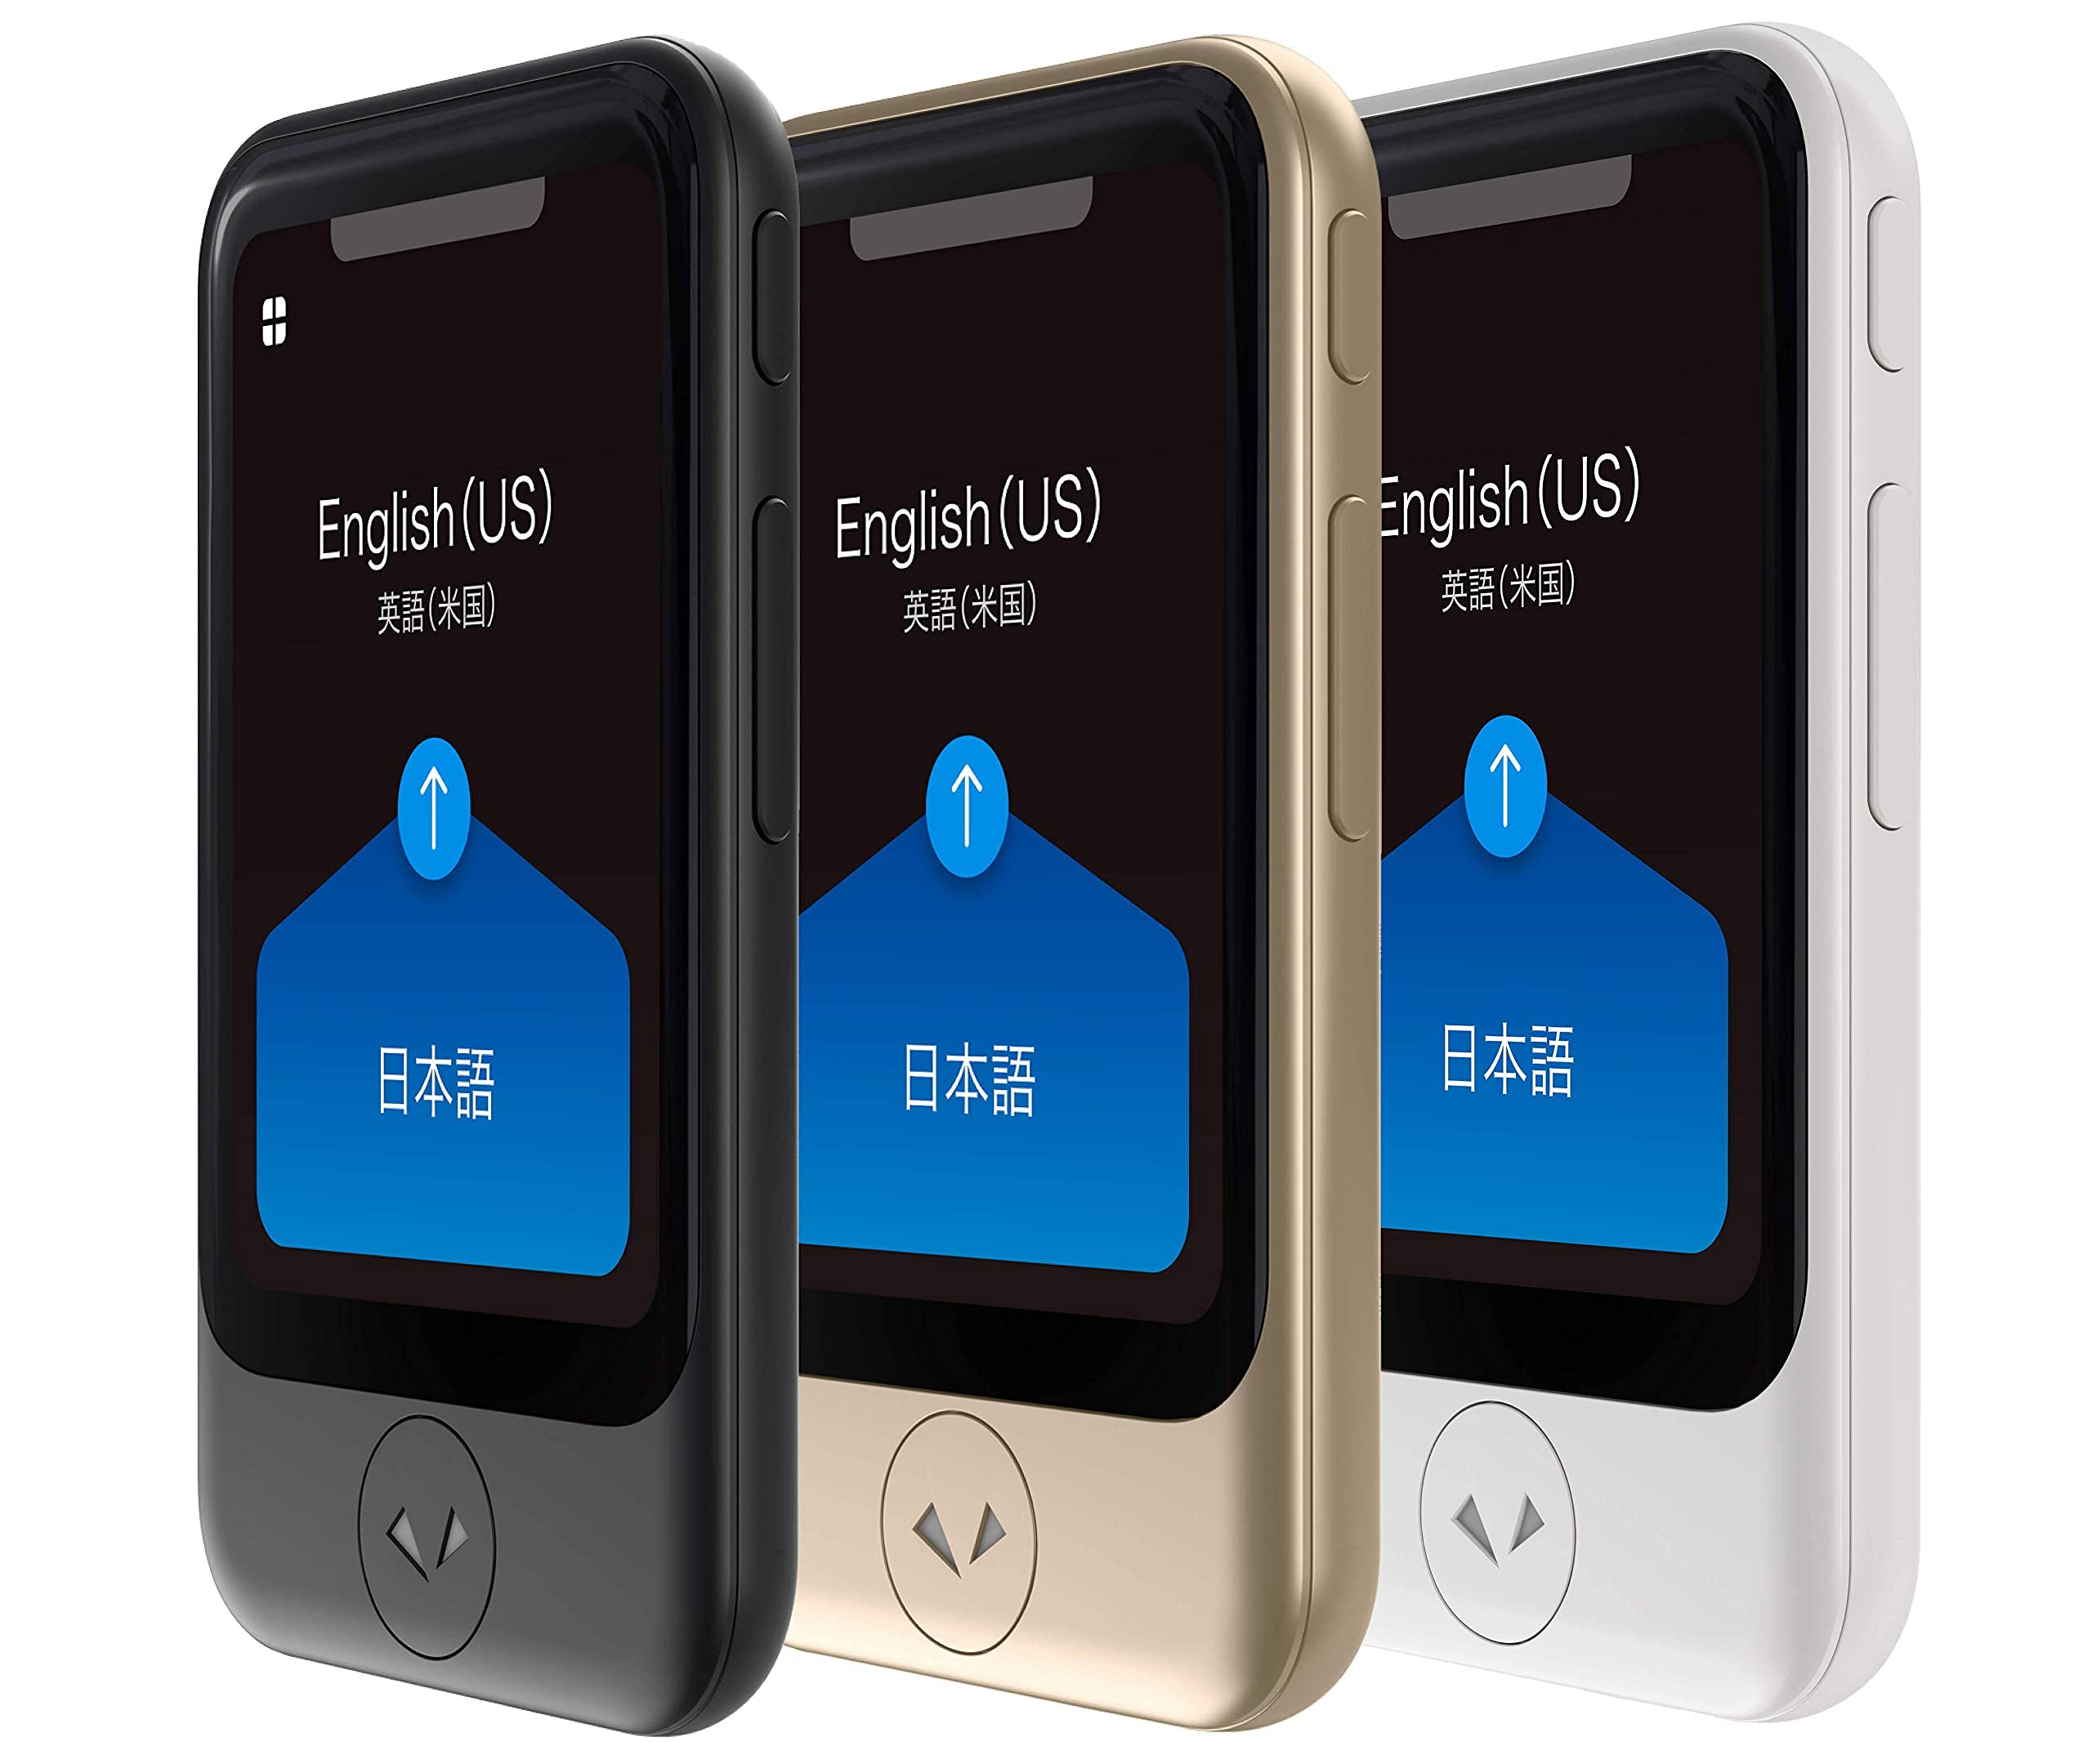 Pocketalk Model S Real Time Two-Way 82 Language Voice Translator with 2 Year Built-in Data and Text-to-Translate Camera & HIPAA Compliant/Black